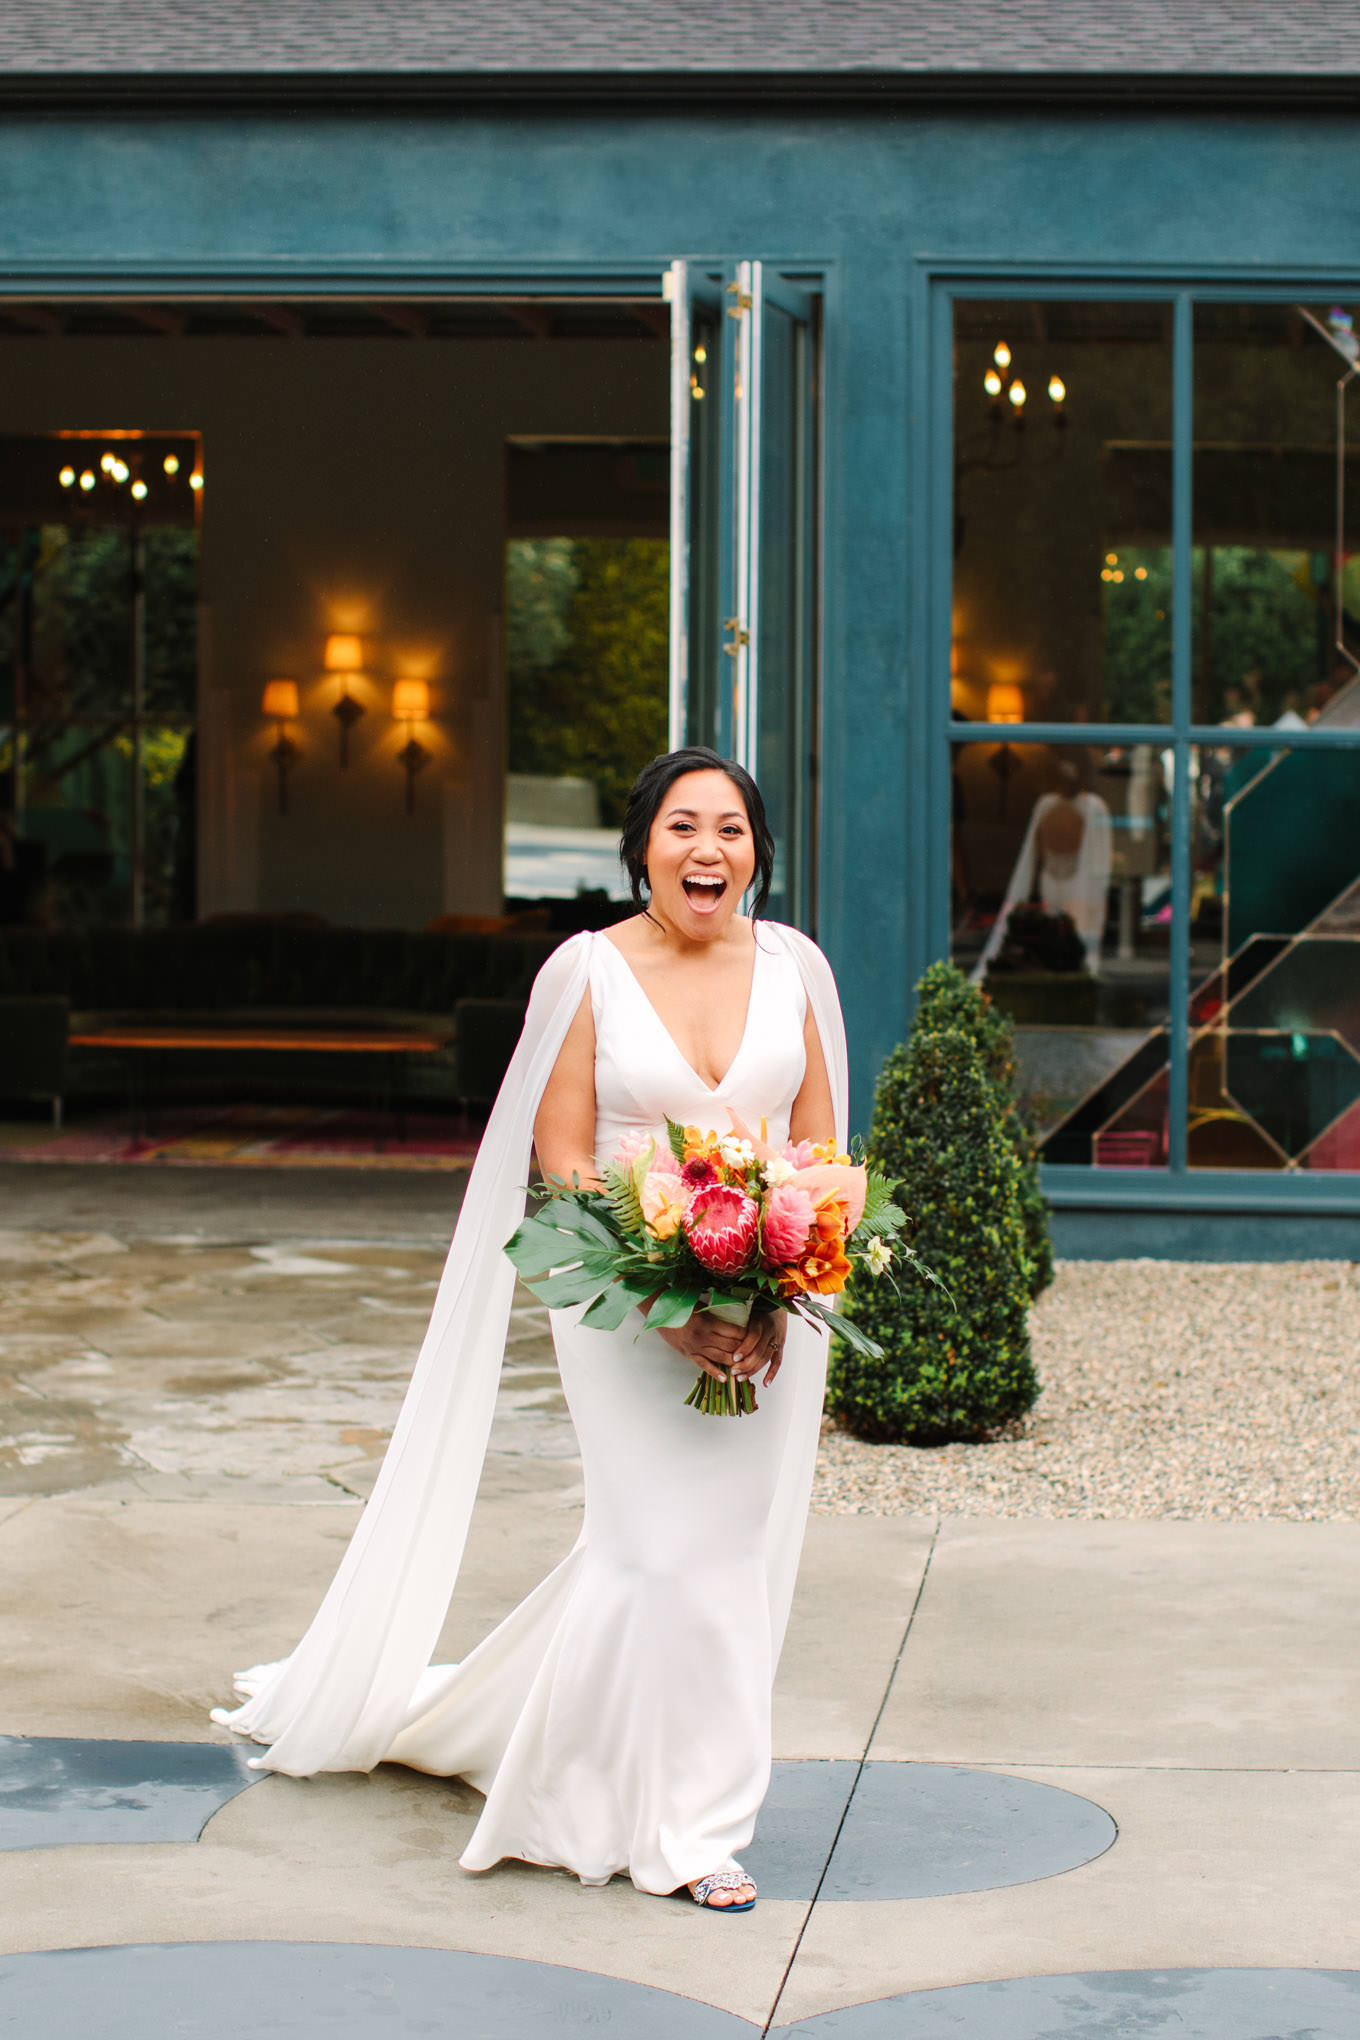 Bride walking into wedding ceremony | TV inspired wedding at The Fig House Los Angeles | Published on The Knot | Fresh and colorful photography for fun-loving couples in Southern California | #losangeleswedding #TVwedding #colorfulwedding #theknot   Source: Mary Costa Photography | Los Angeles wedding photographer